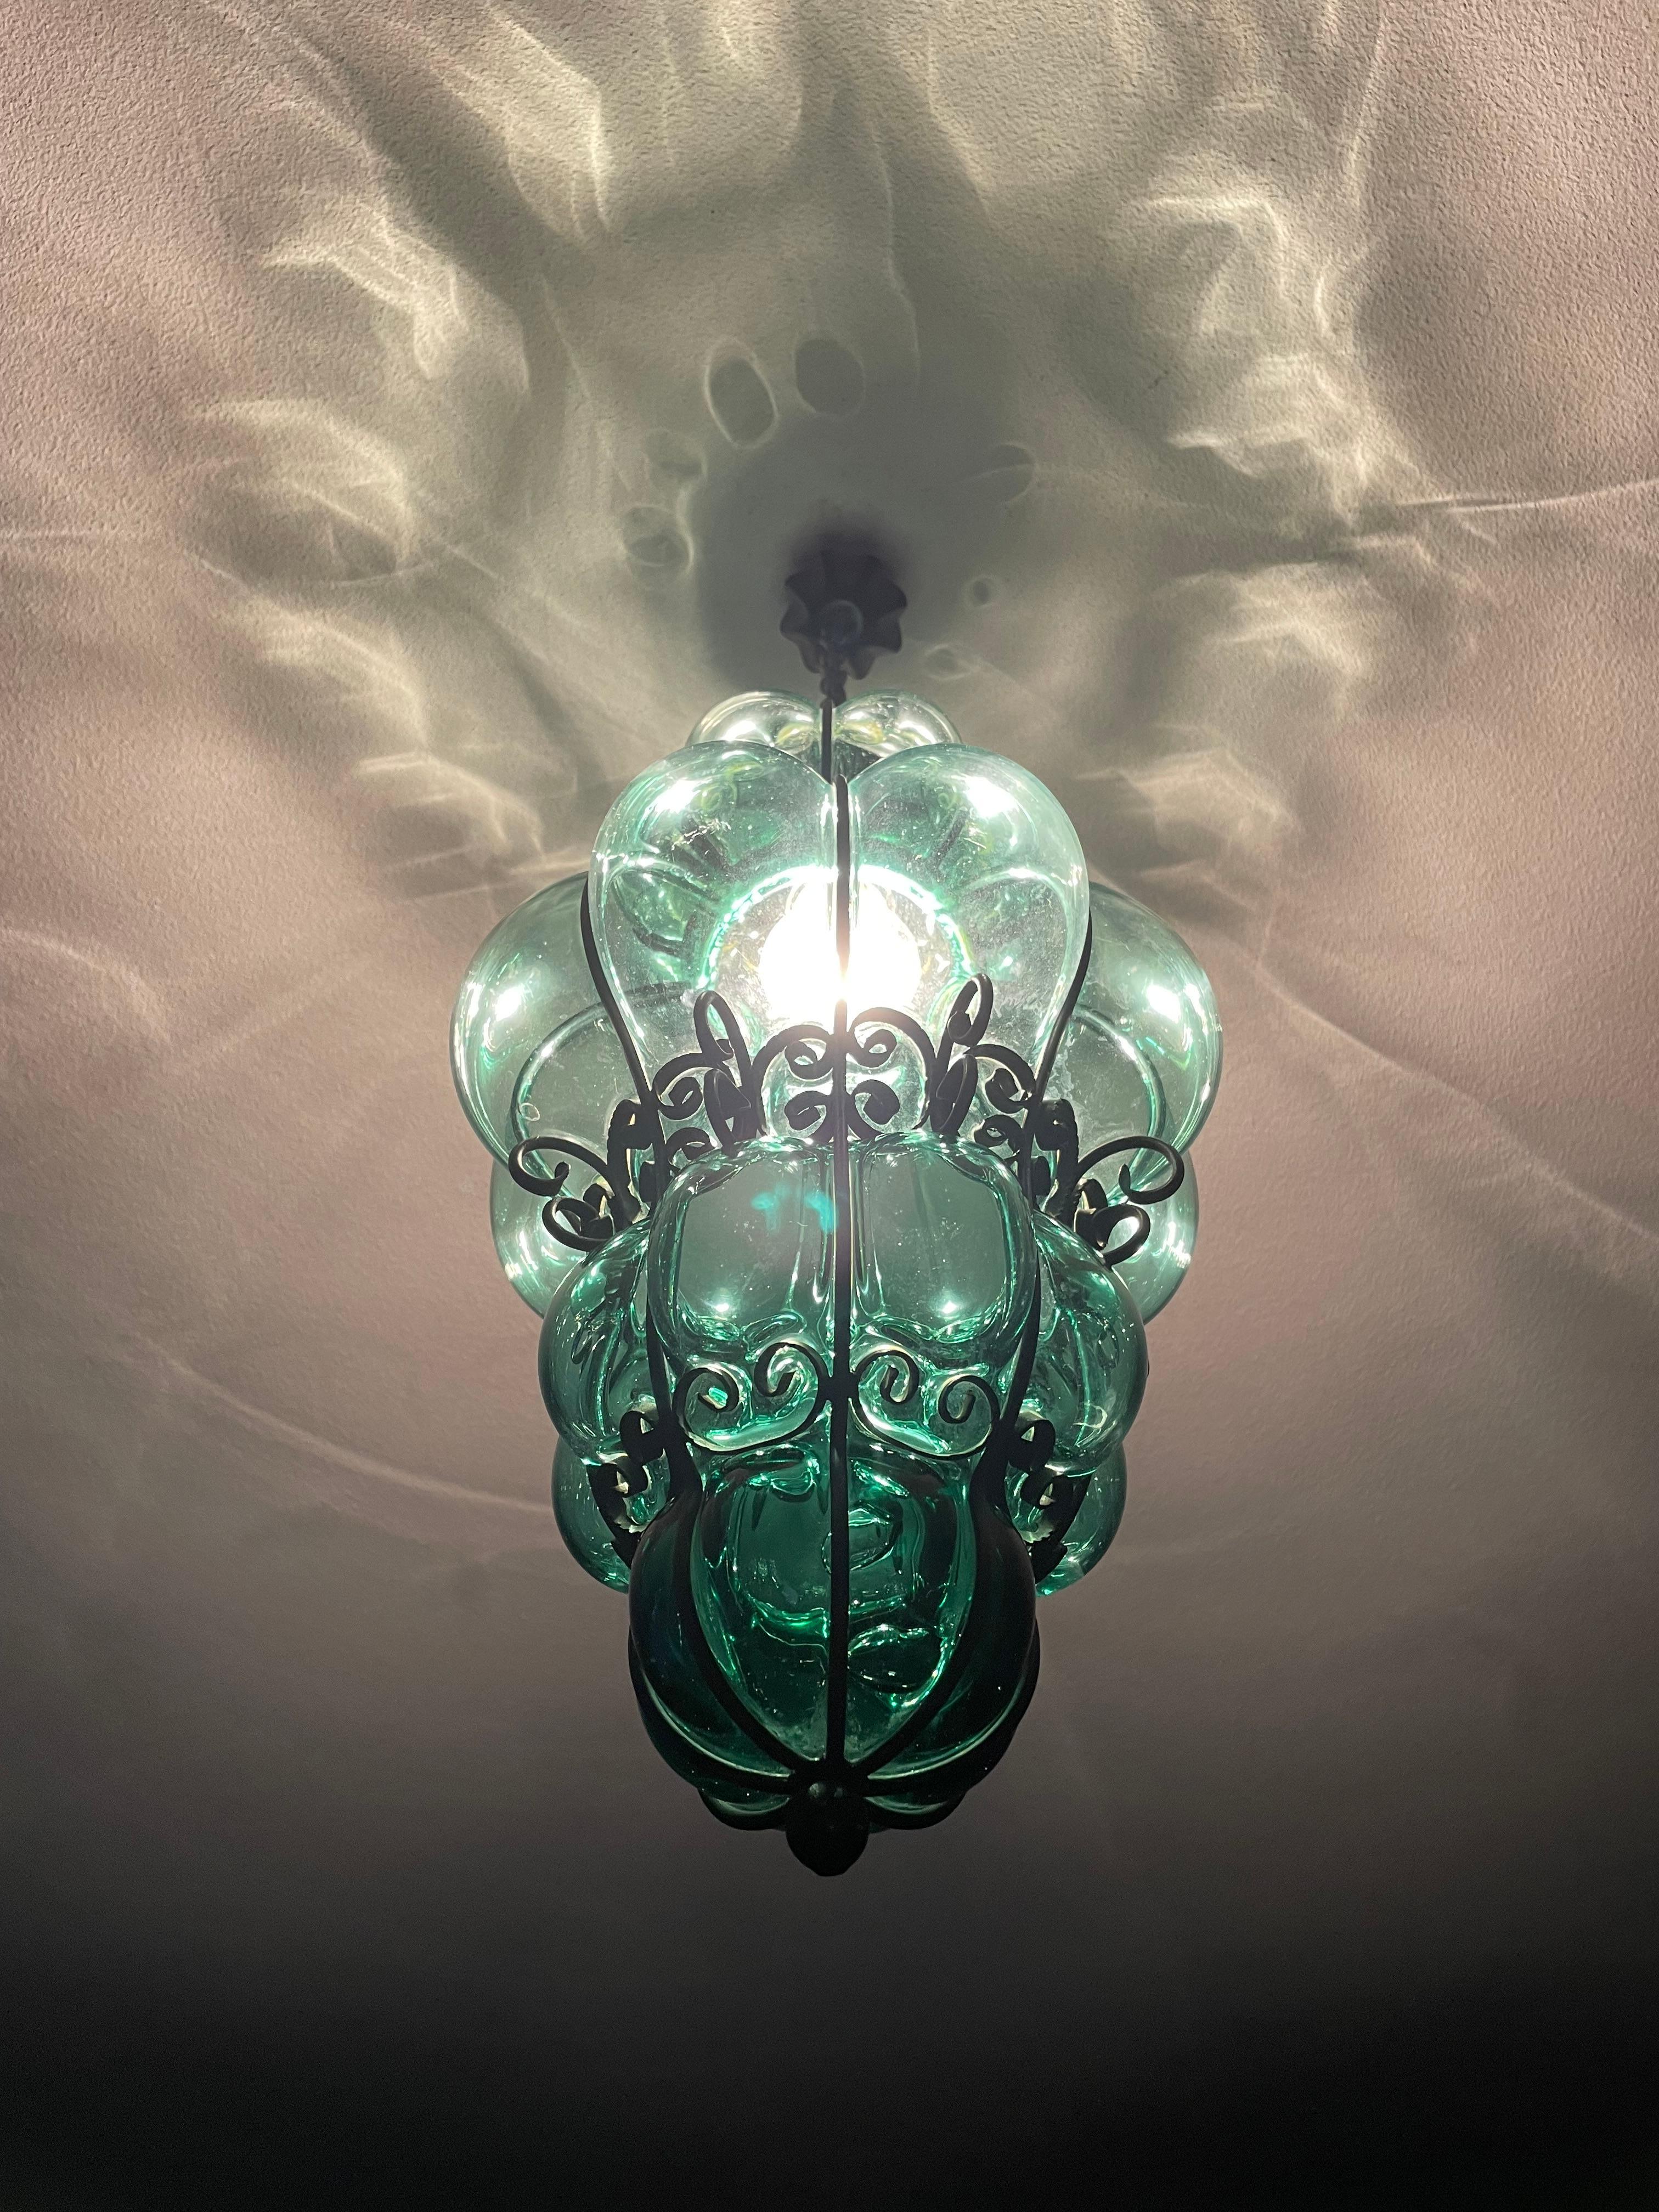 Beautiful color and practical size Italian fixture with mouth blown glass in a wrought iron frame. 

If you are looking for a rare and truly stylish Murano light fixture to grace your home then this handcrafted and semi-antique specimen could be